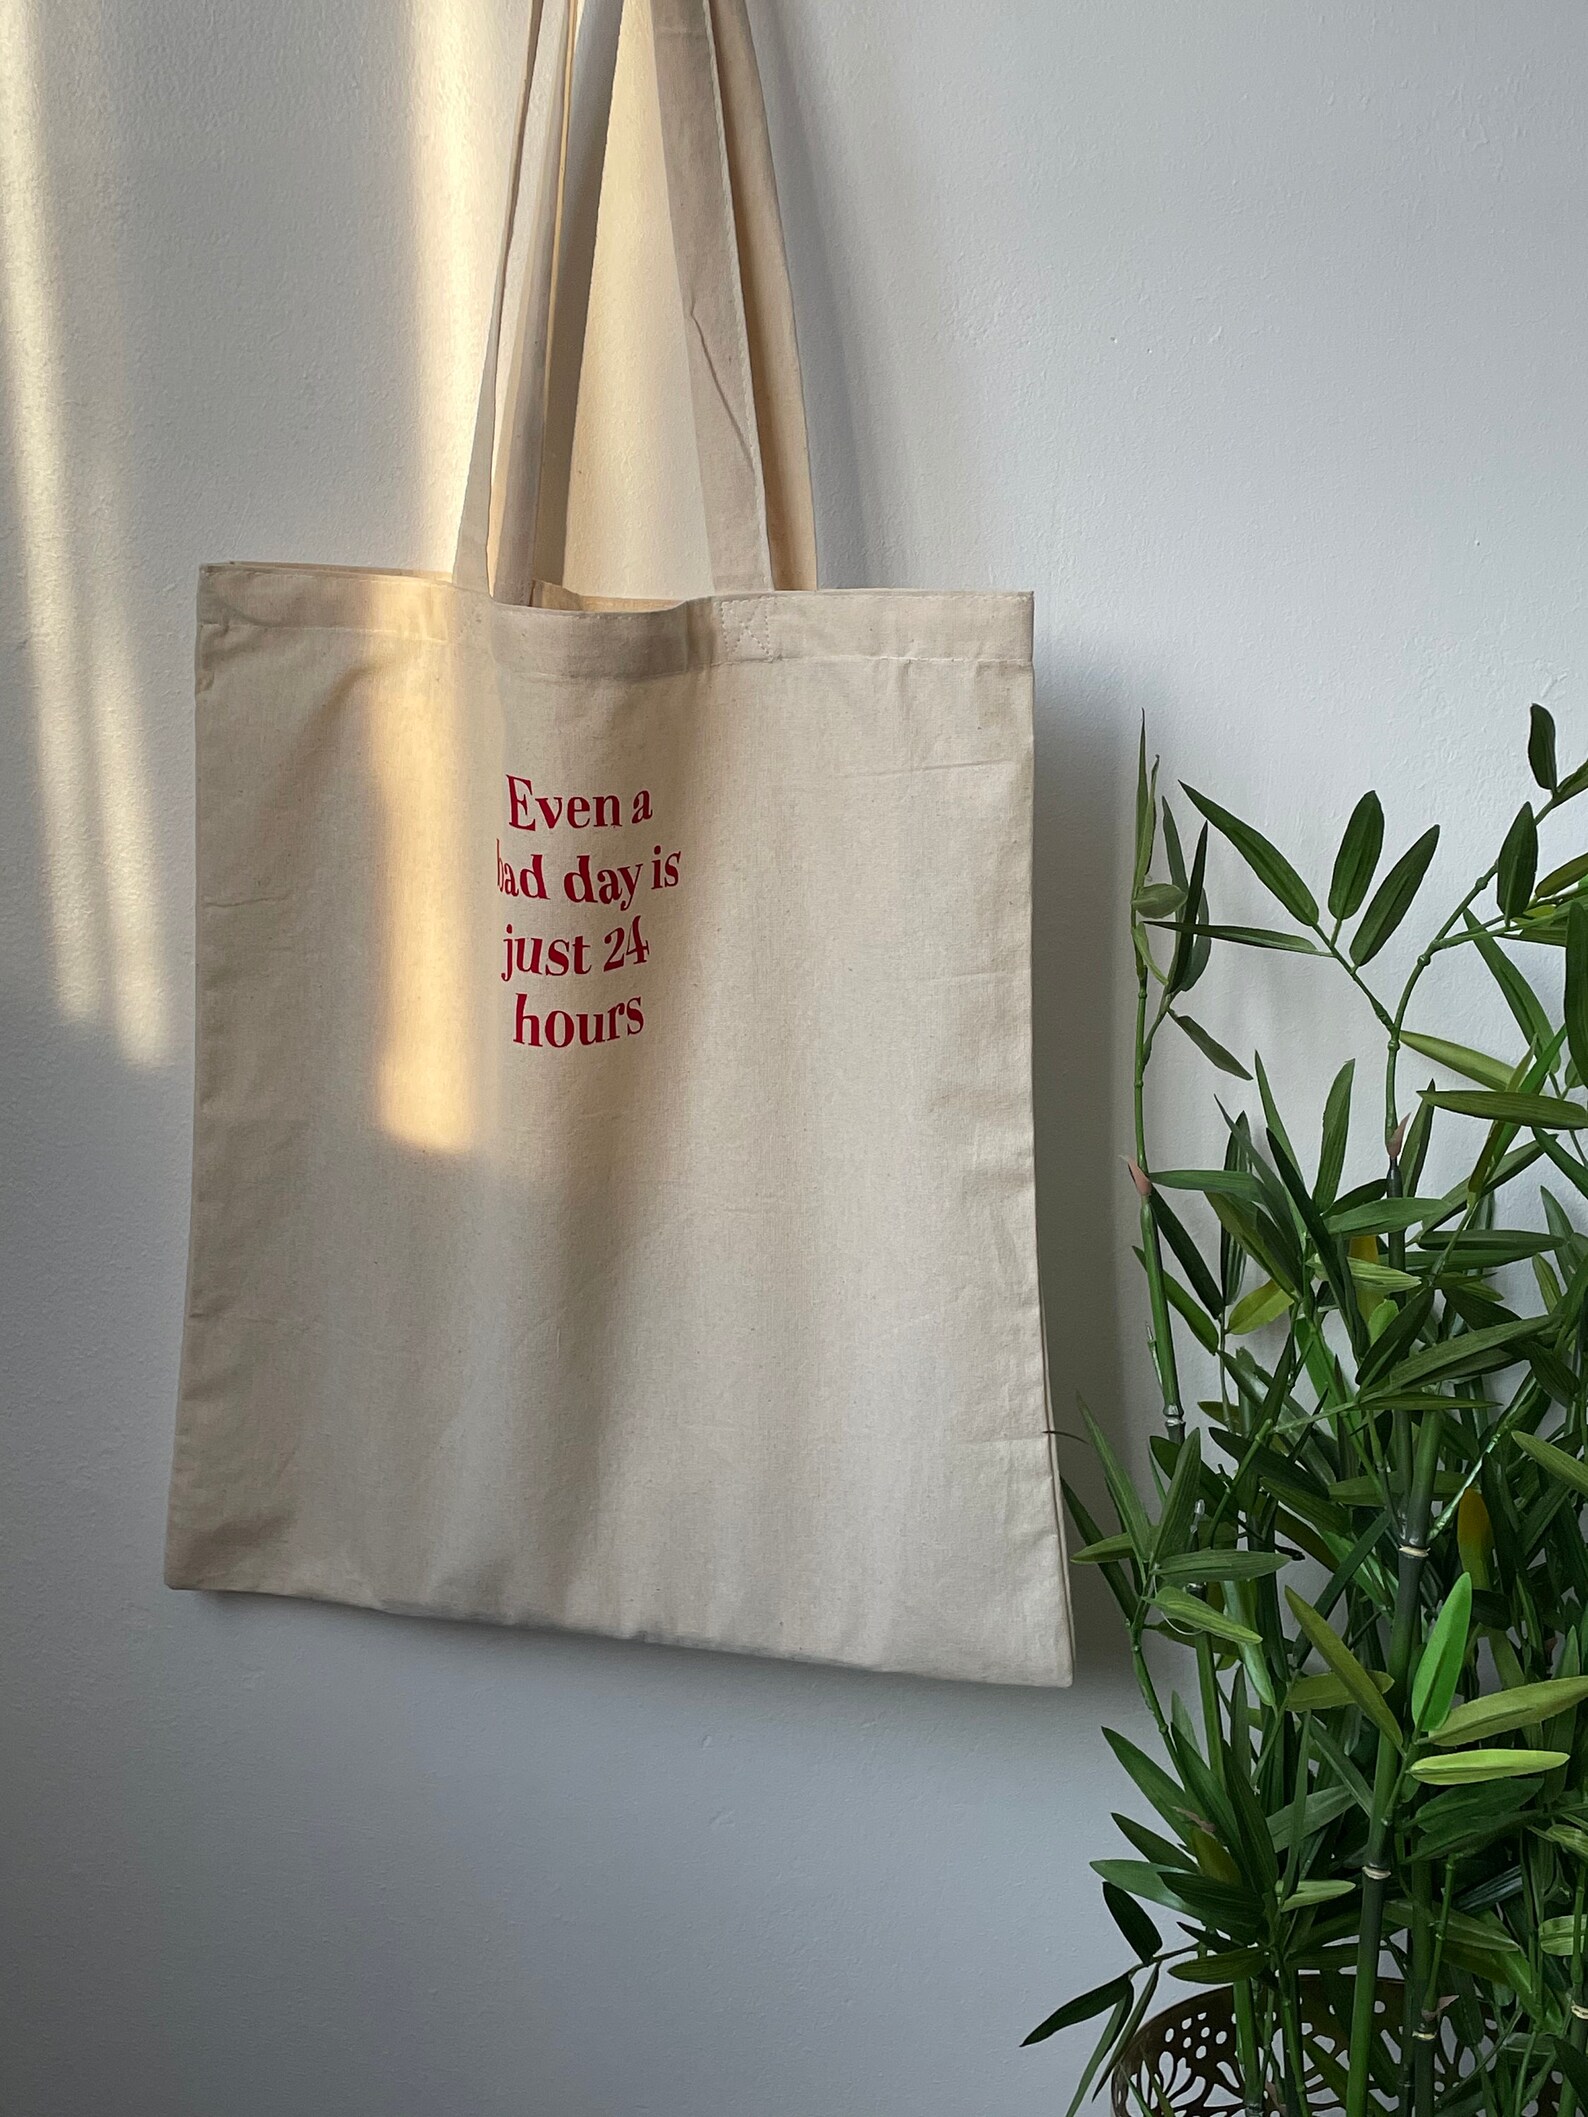 Even a bad day is just 24 hours quote tote bag | Etsy